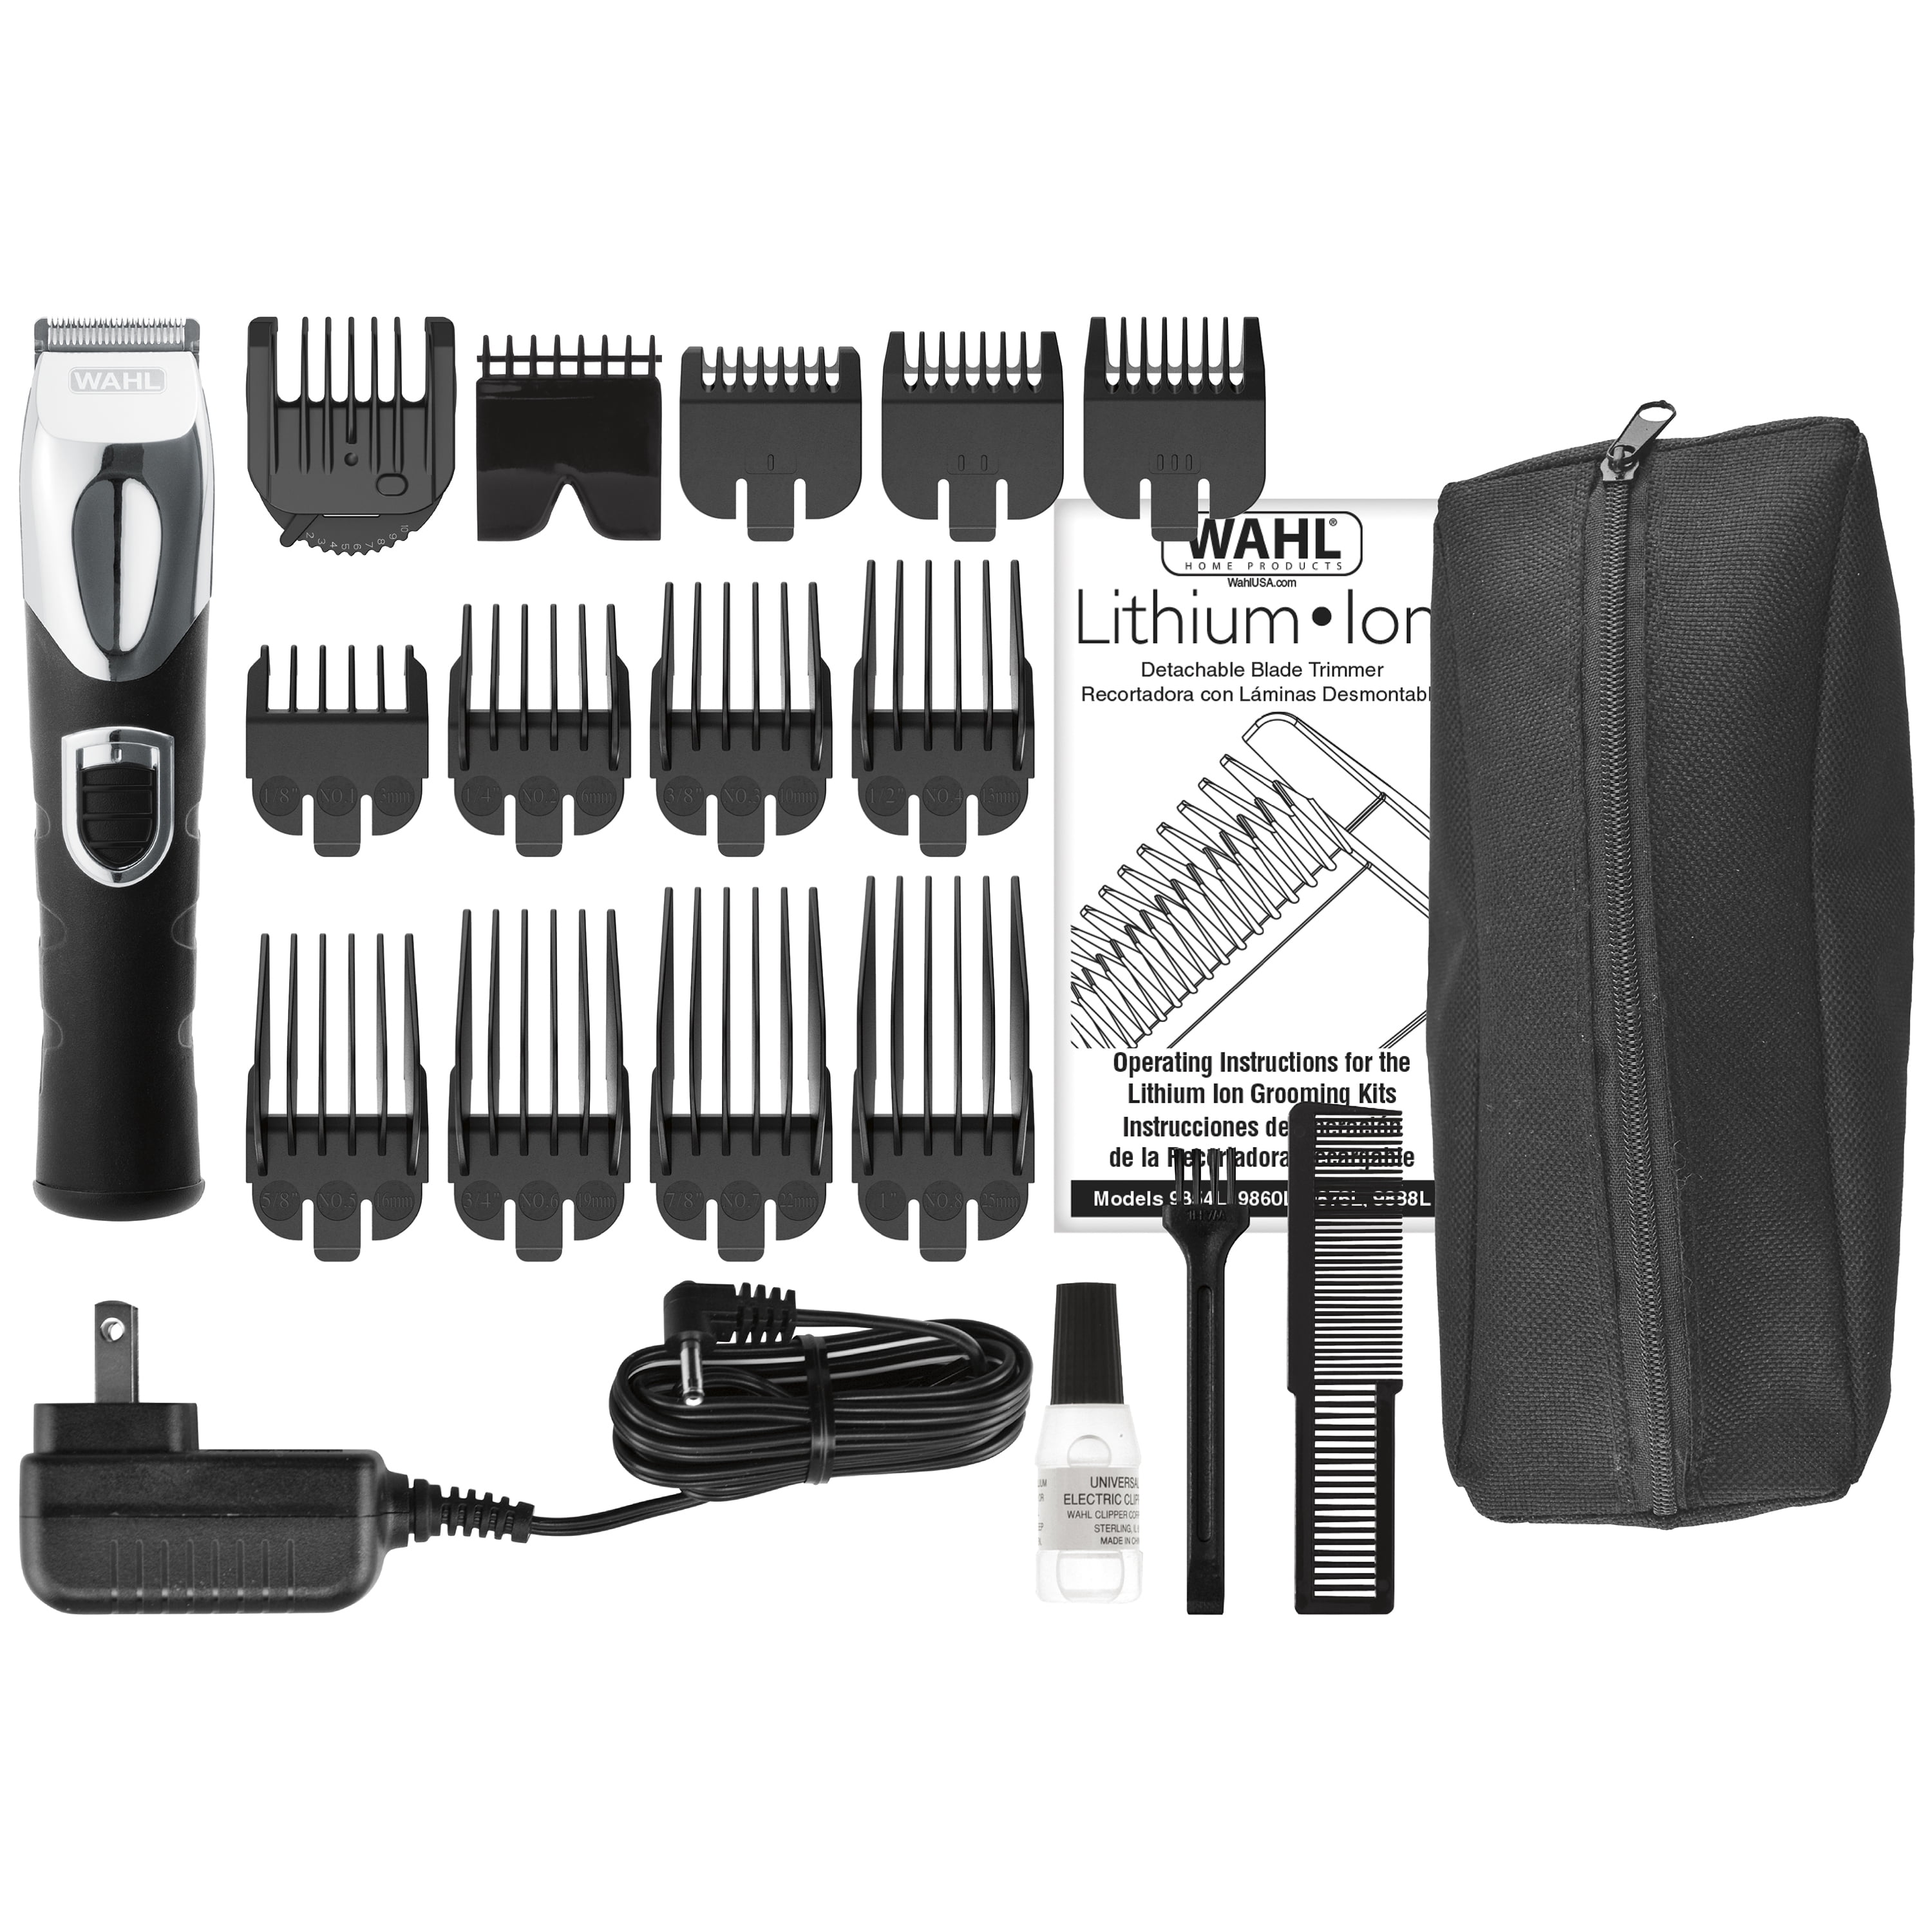 revolution lithium ion rechargeable beard trimmer